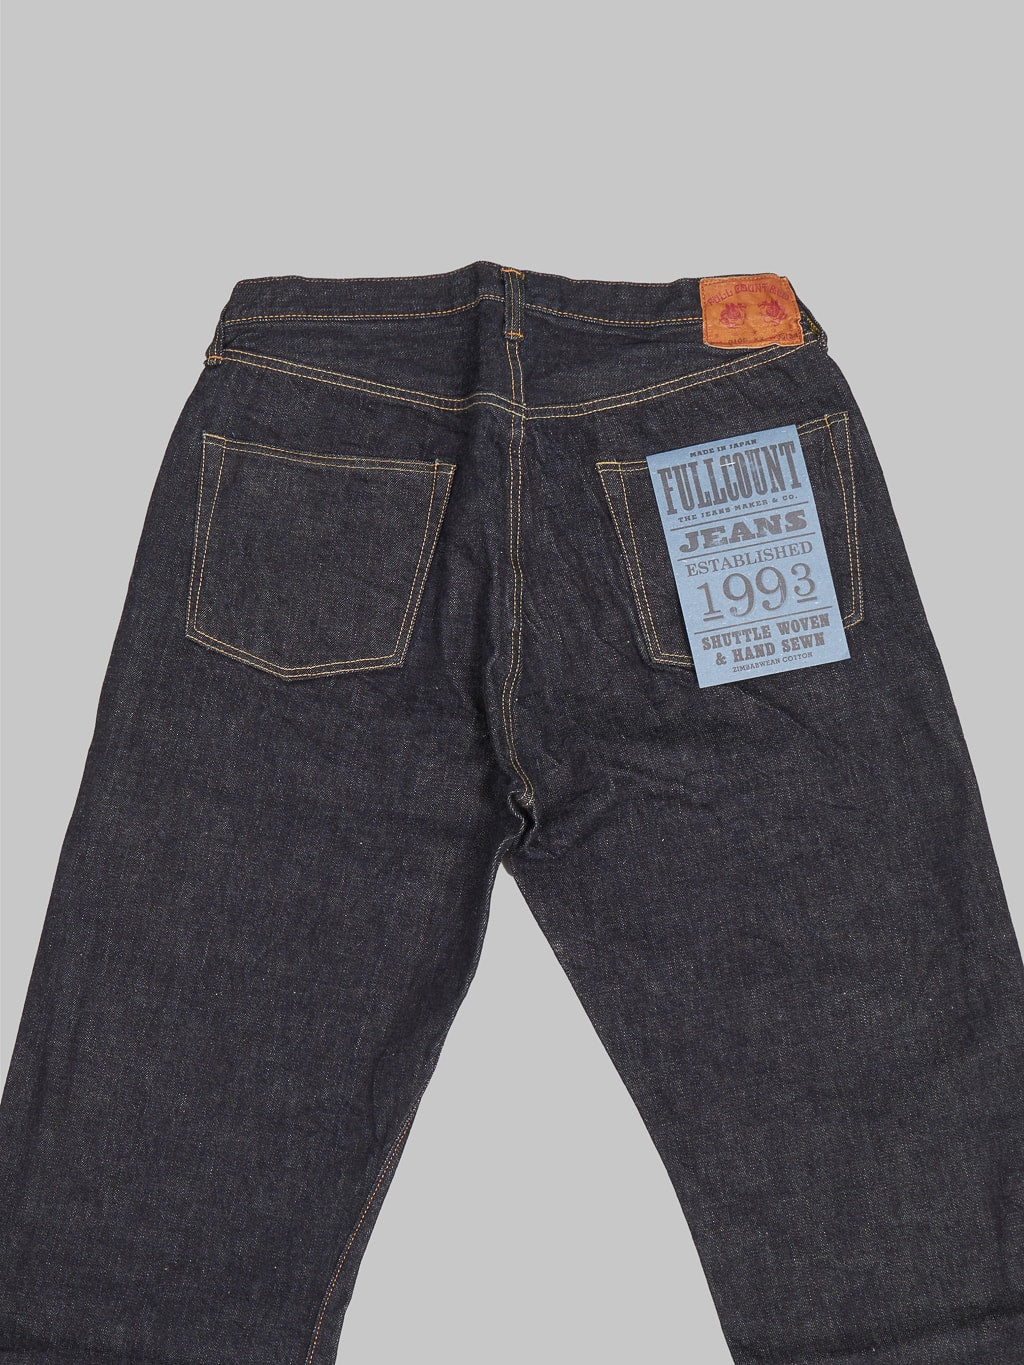 Fullcount 0105XW Wide Straight selvedge Jeans back details